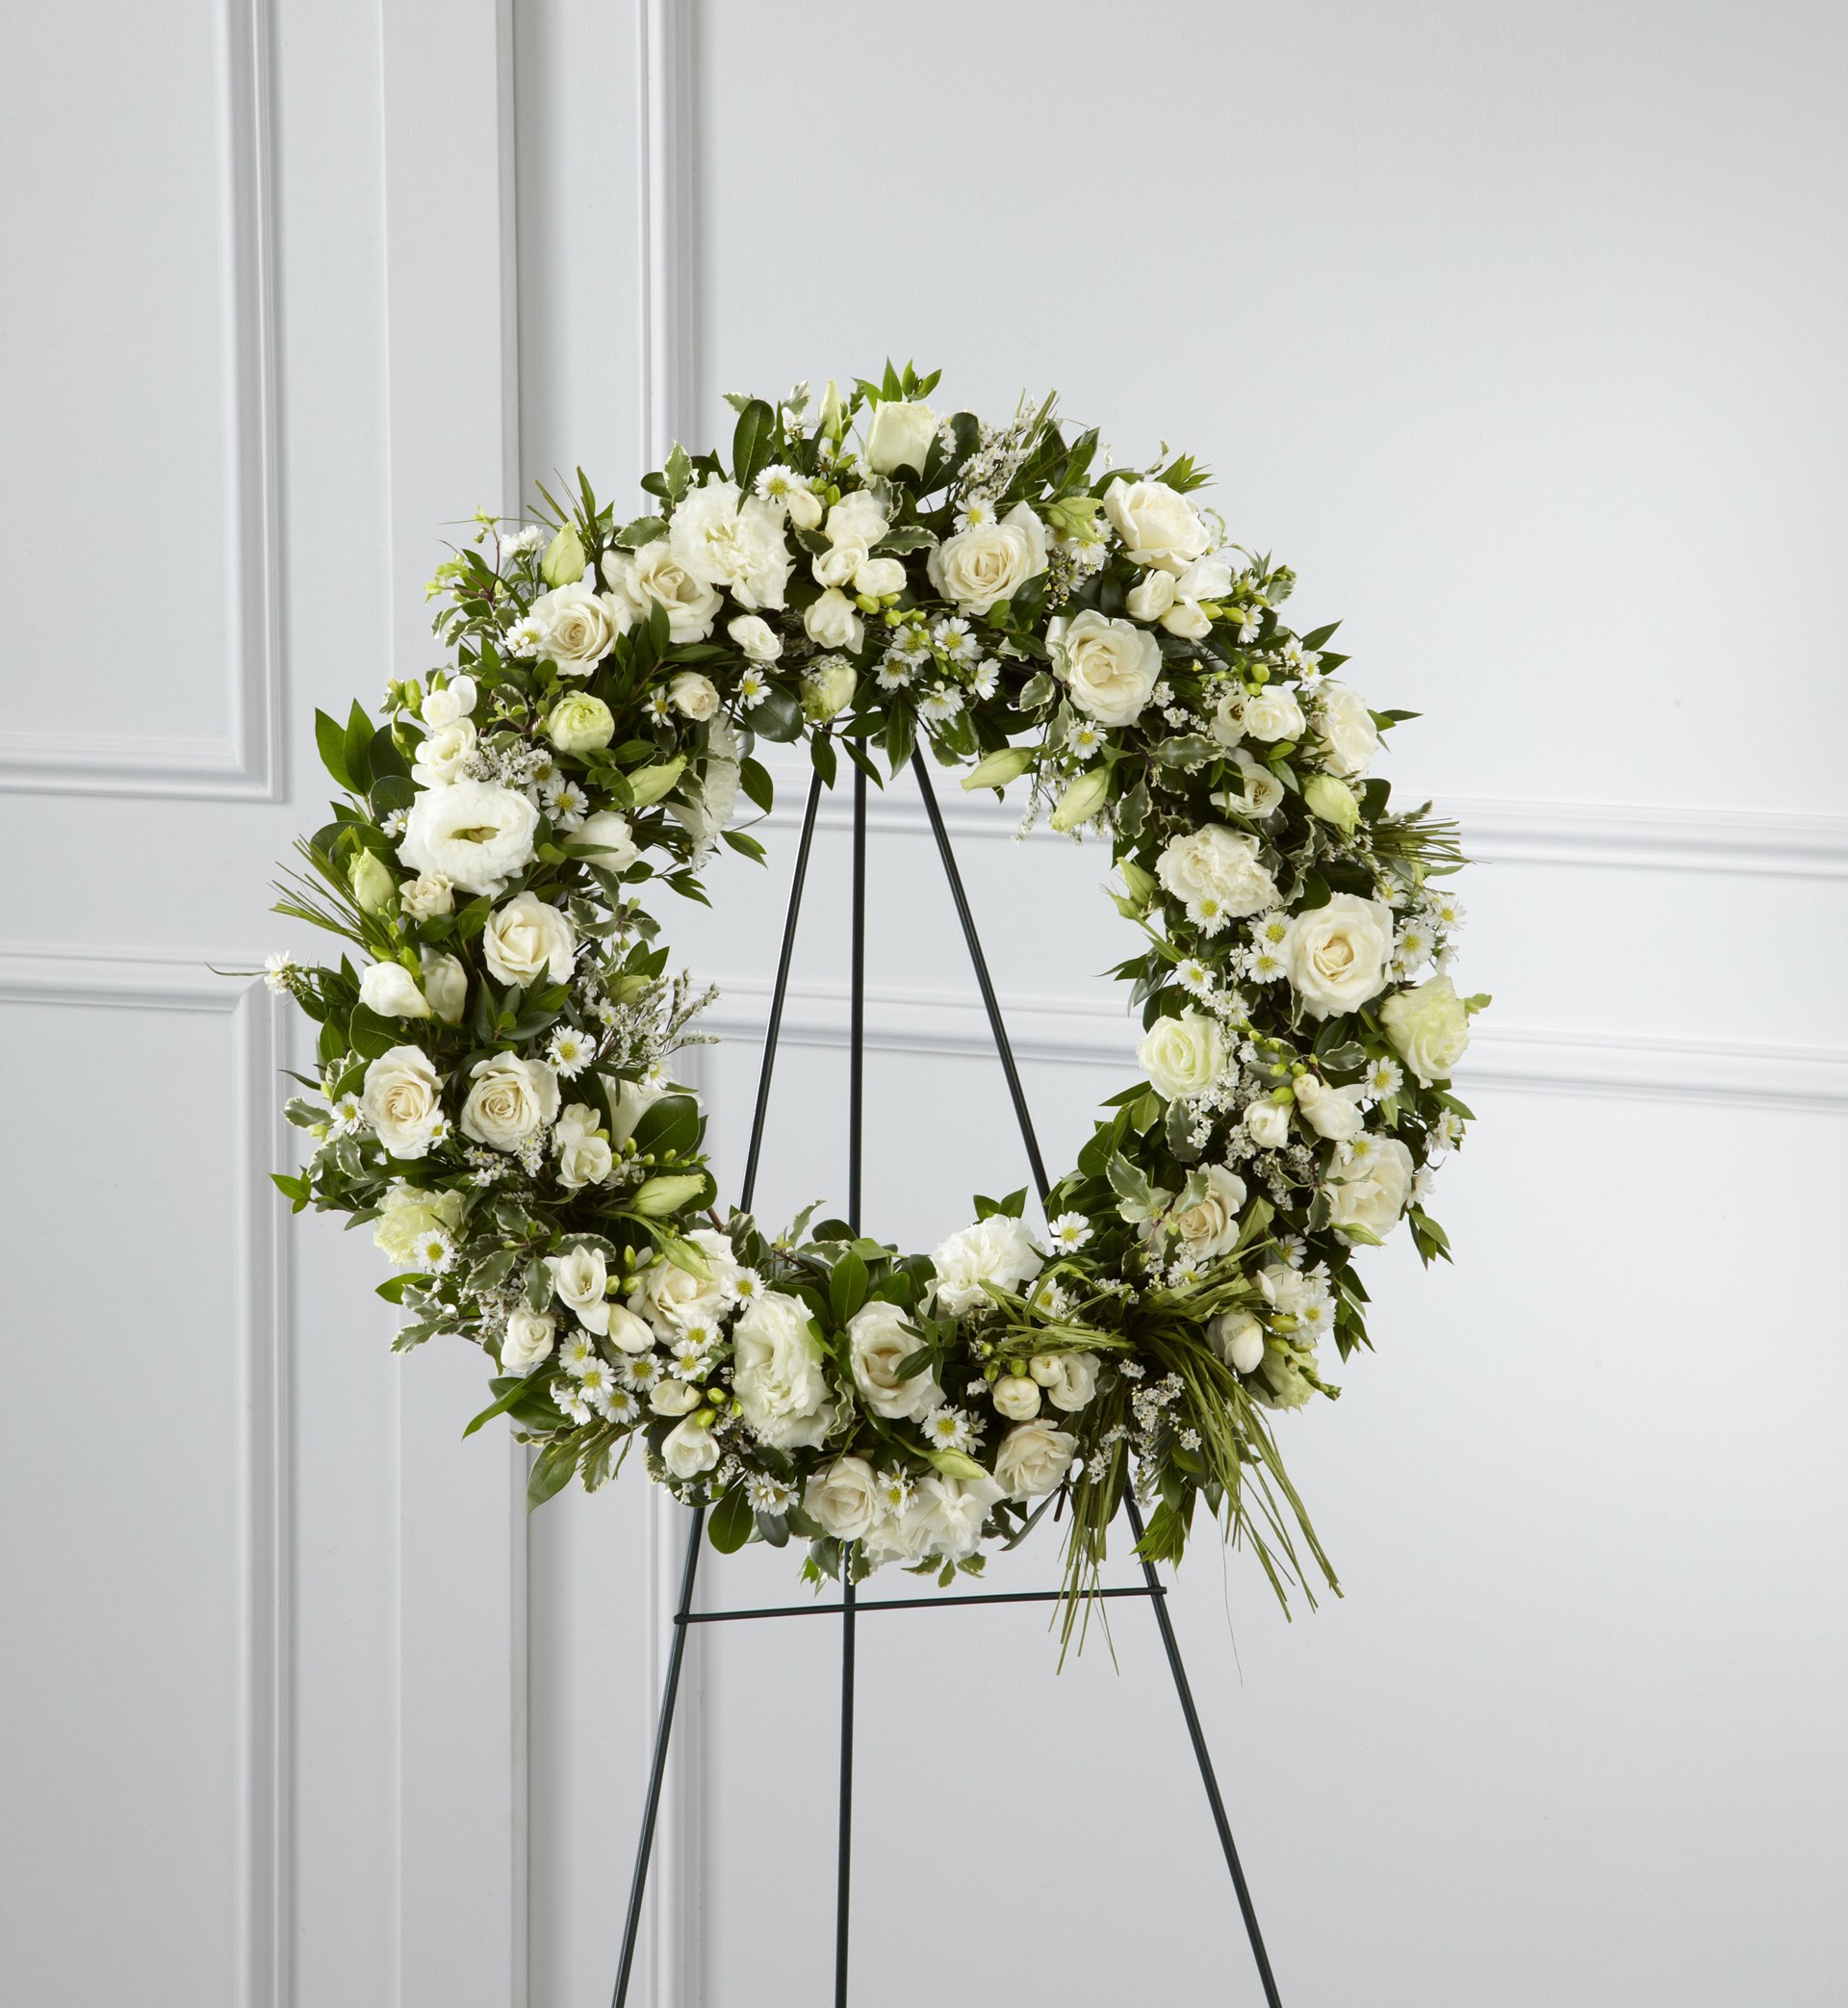 product image for The FTD Splendor Wreath